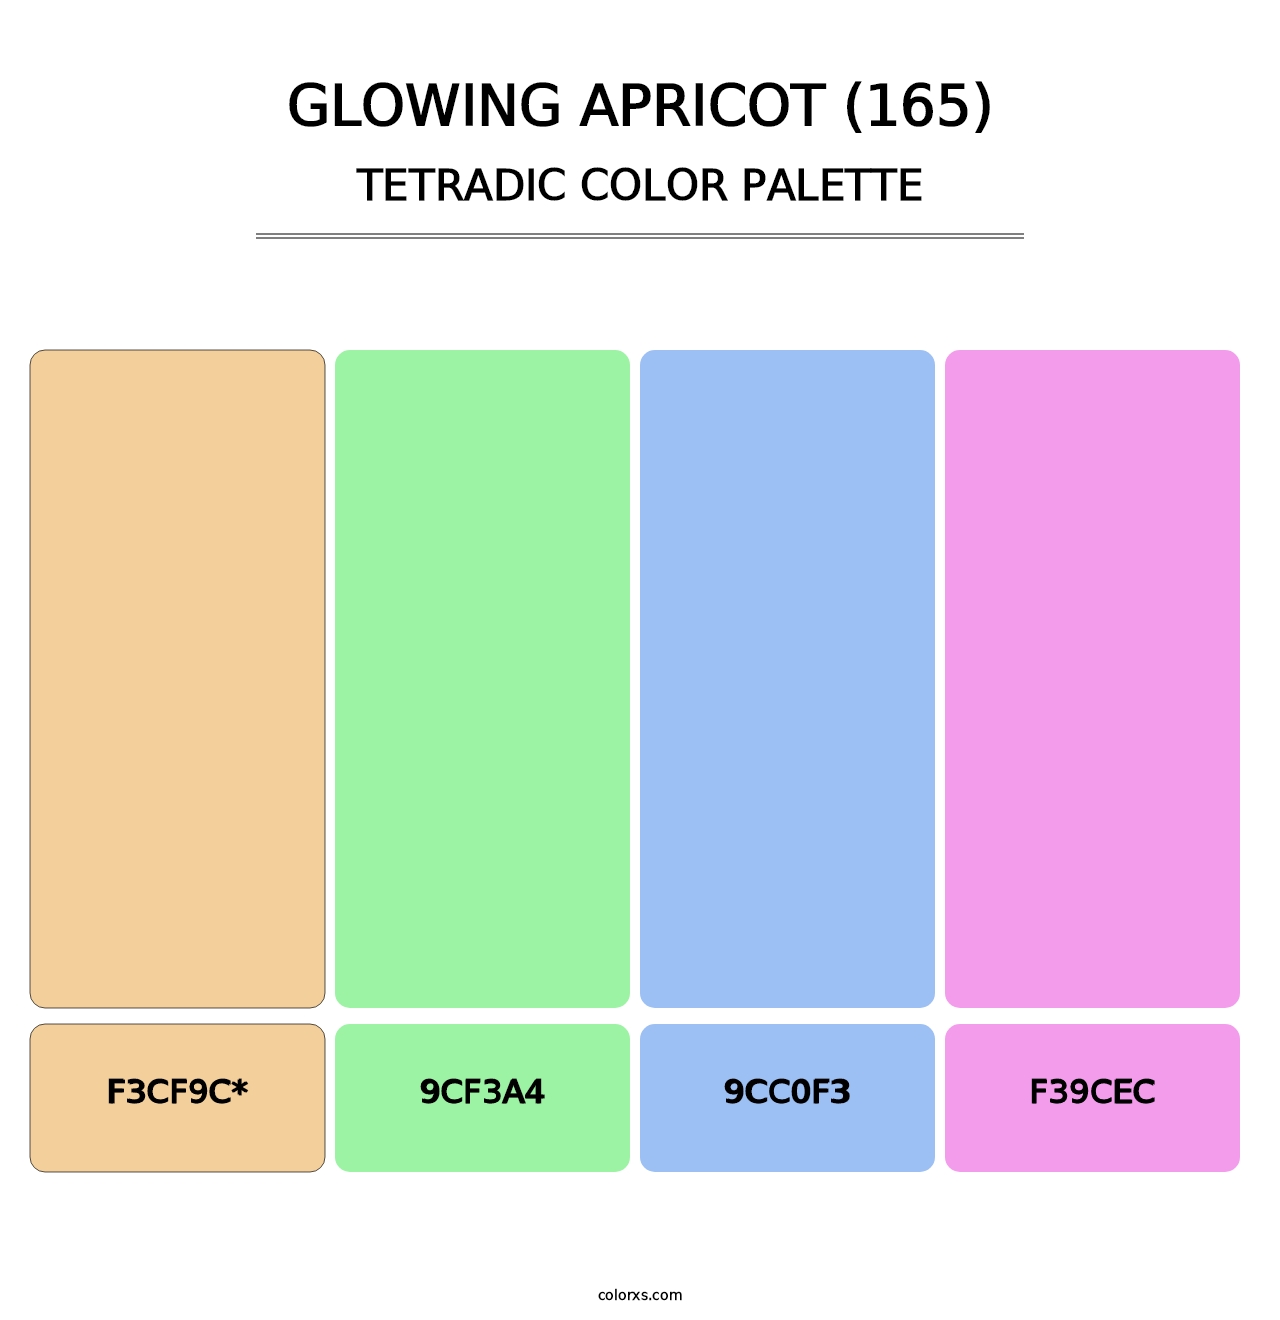 Glowing Apricot (165) - Tetradic Color Palette